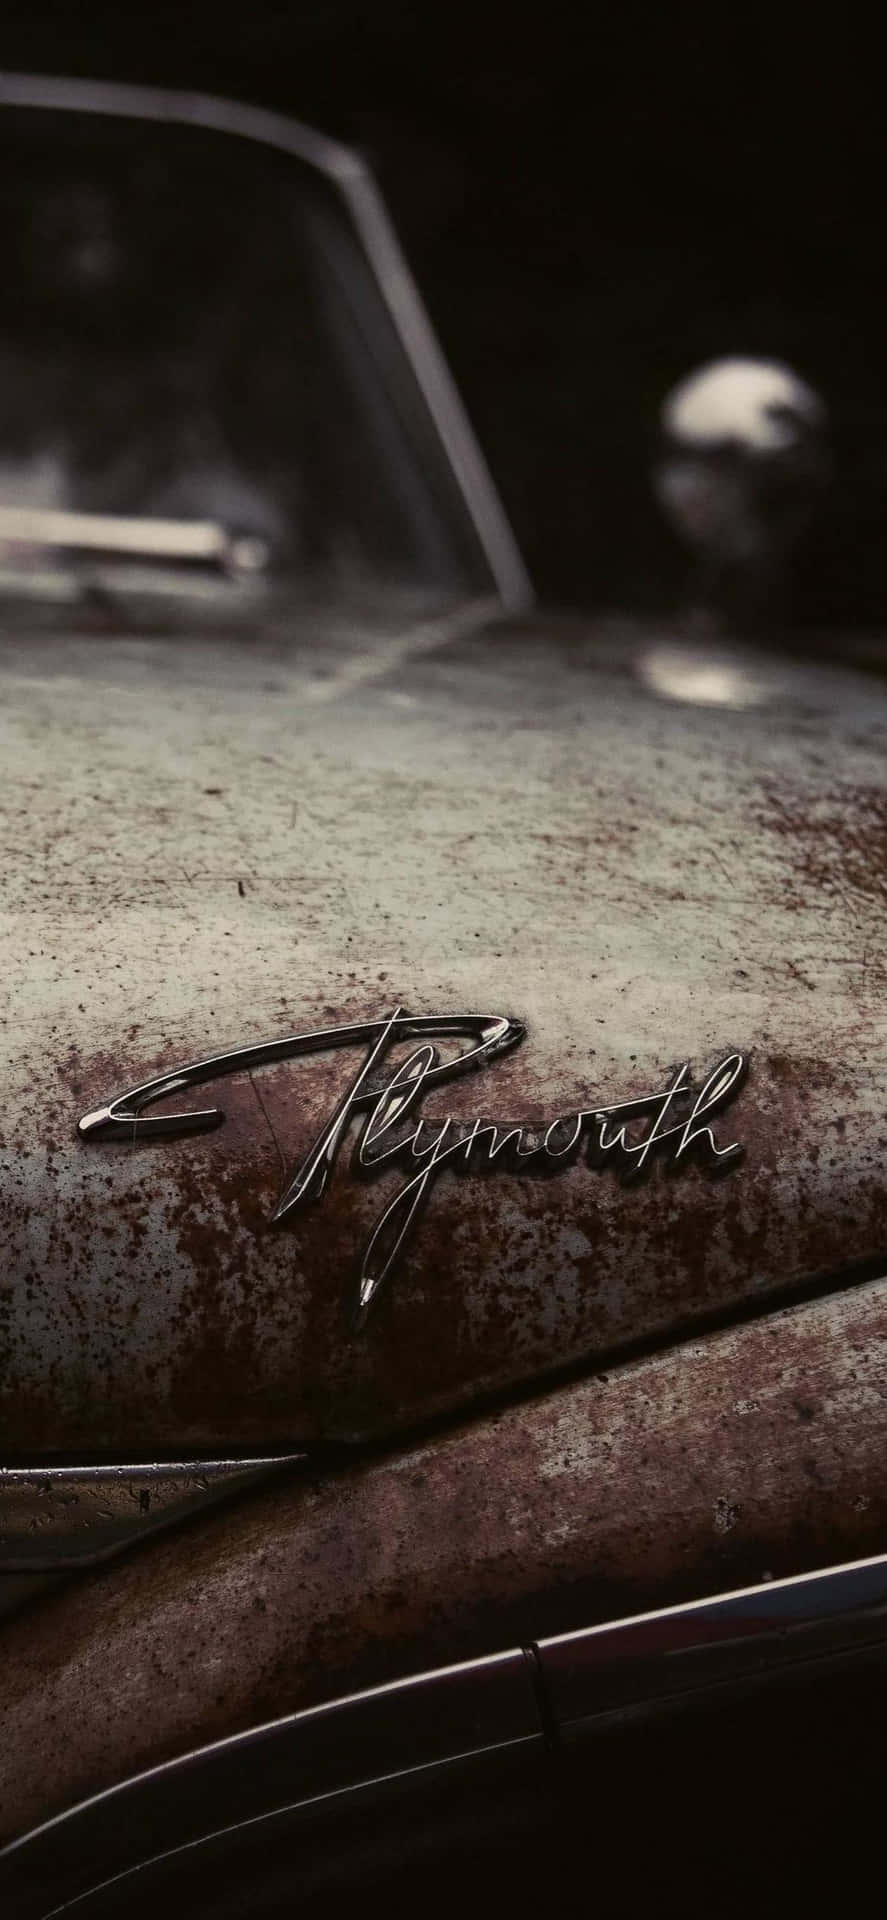 Classic Rusty Plymouth Car Iphone Wallpaper